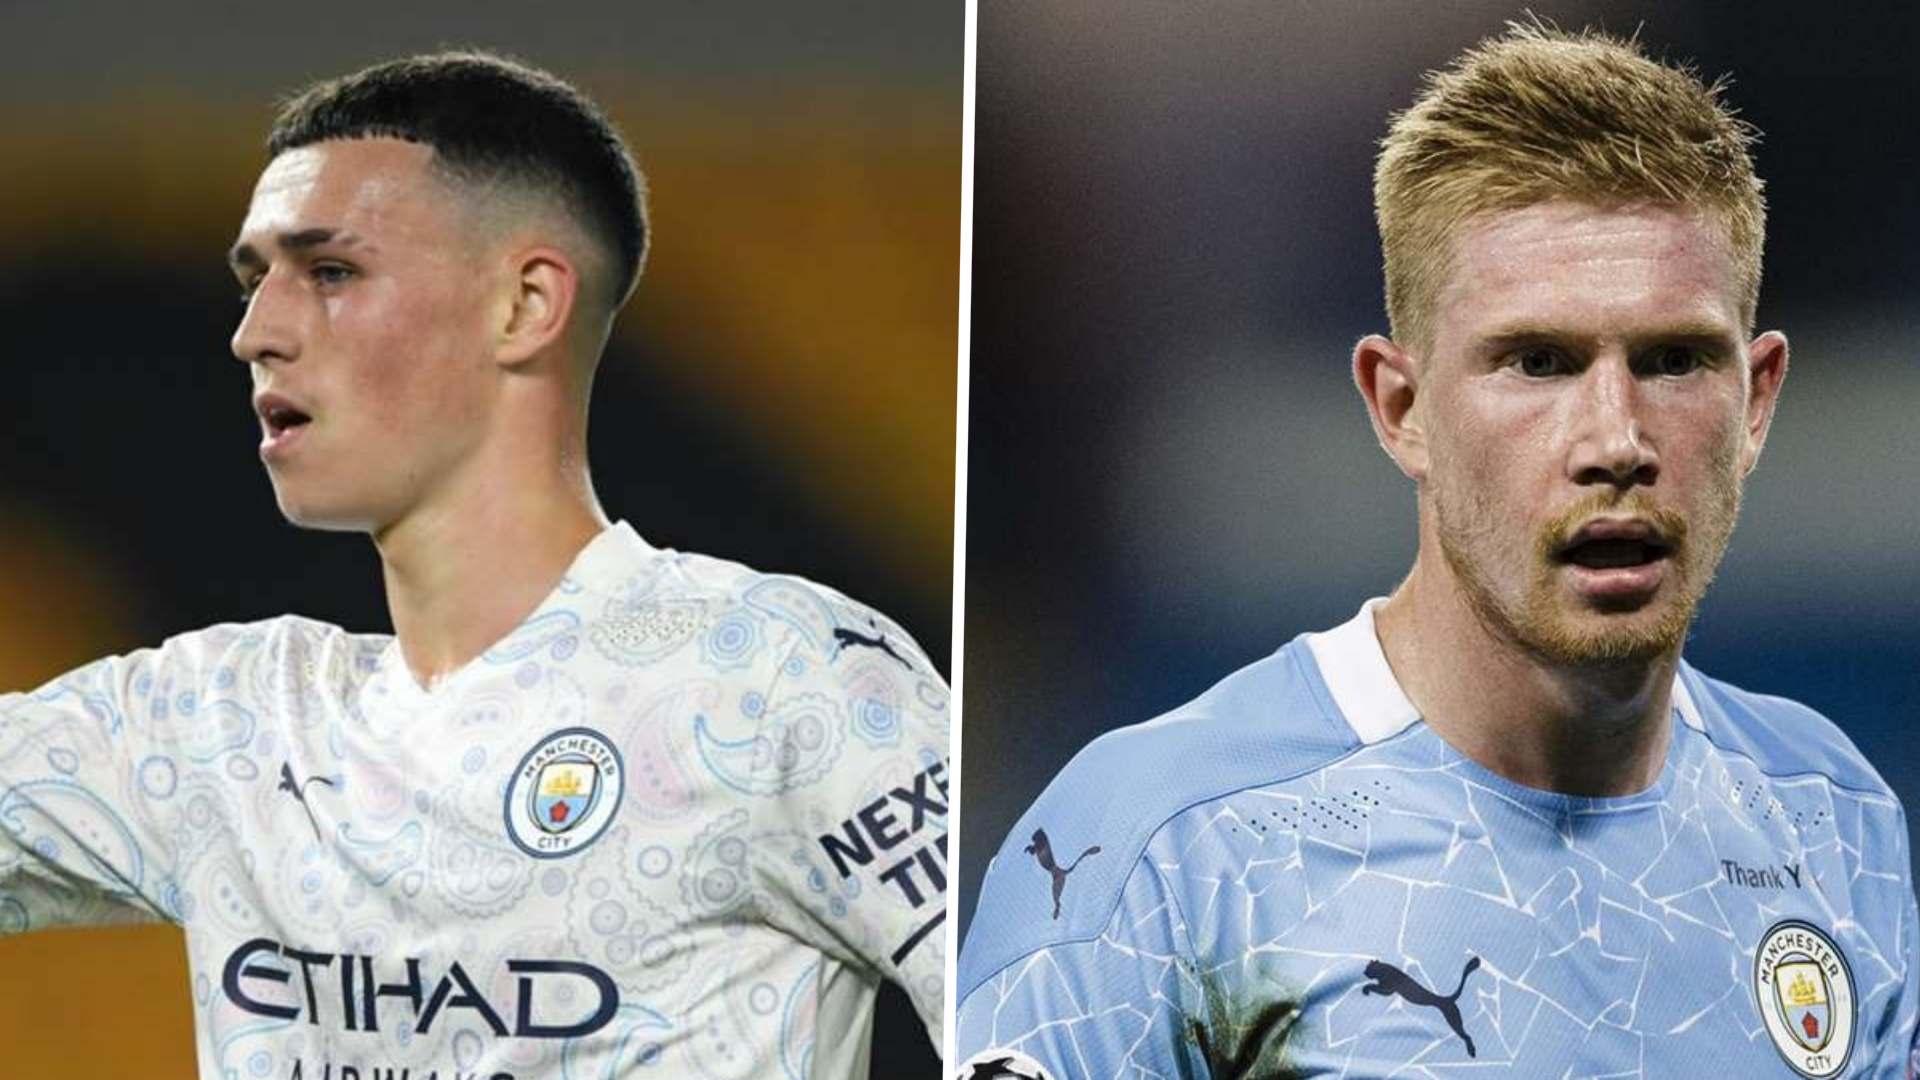 Guardiola confirms De Bruyne and Foden will be out ‘a while’ as Man City boss preps for Grealish debut